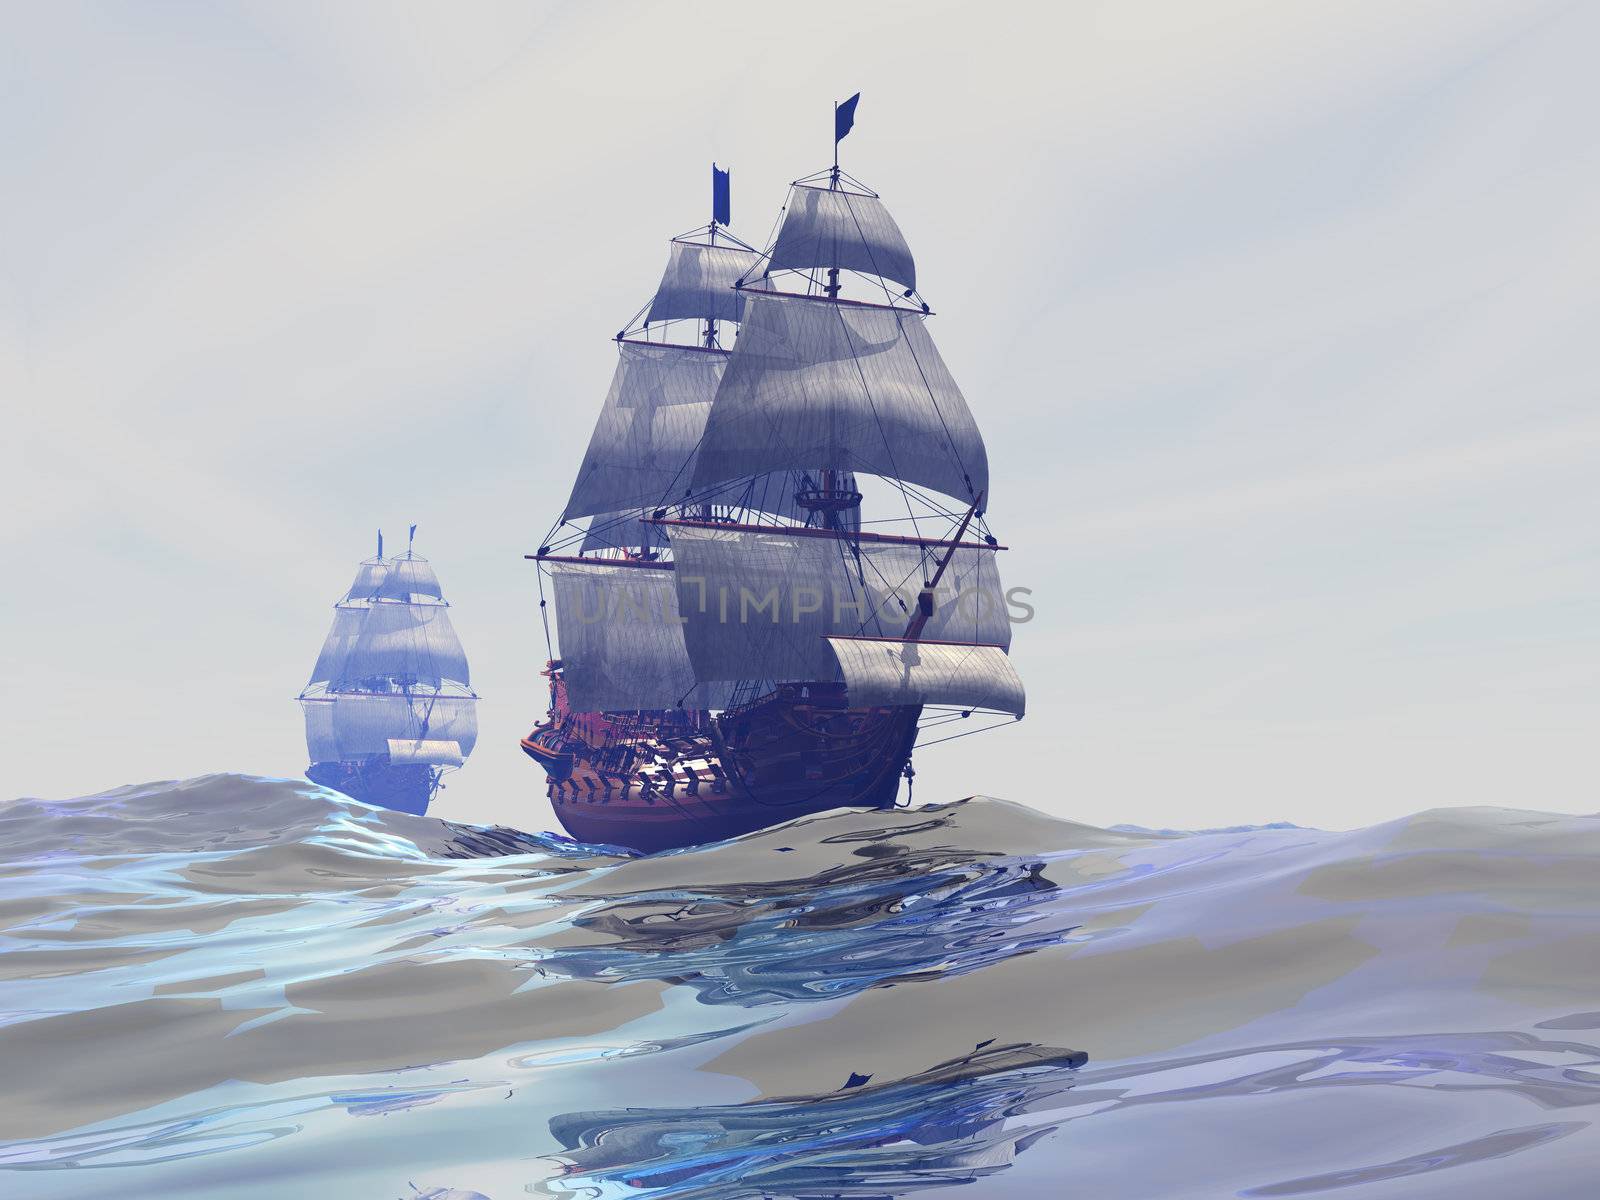 Two tall sailing ships ply the high seas.